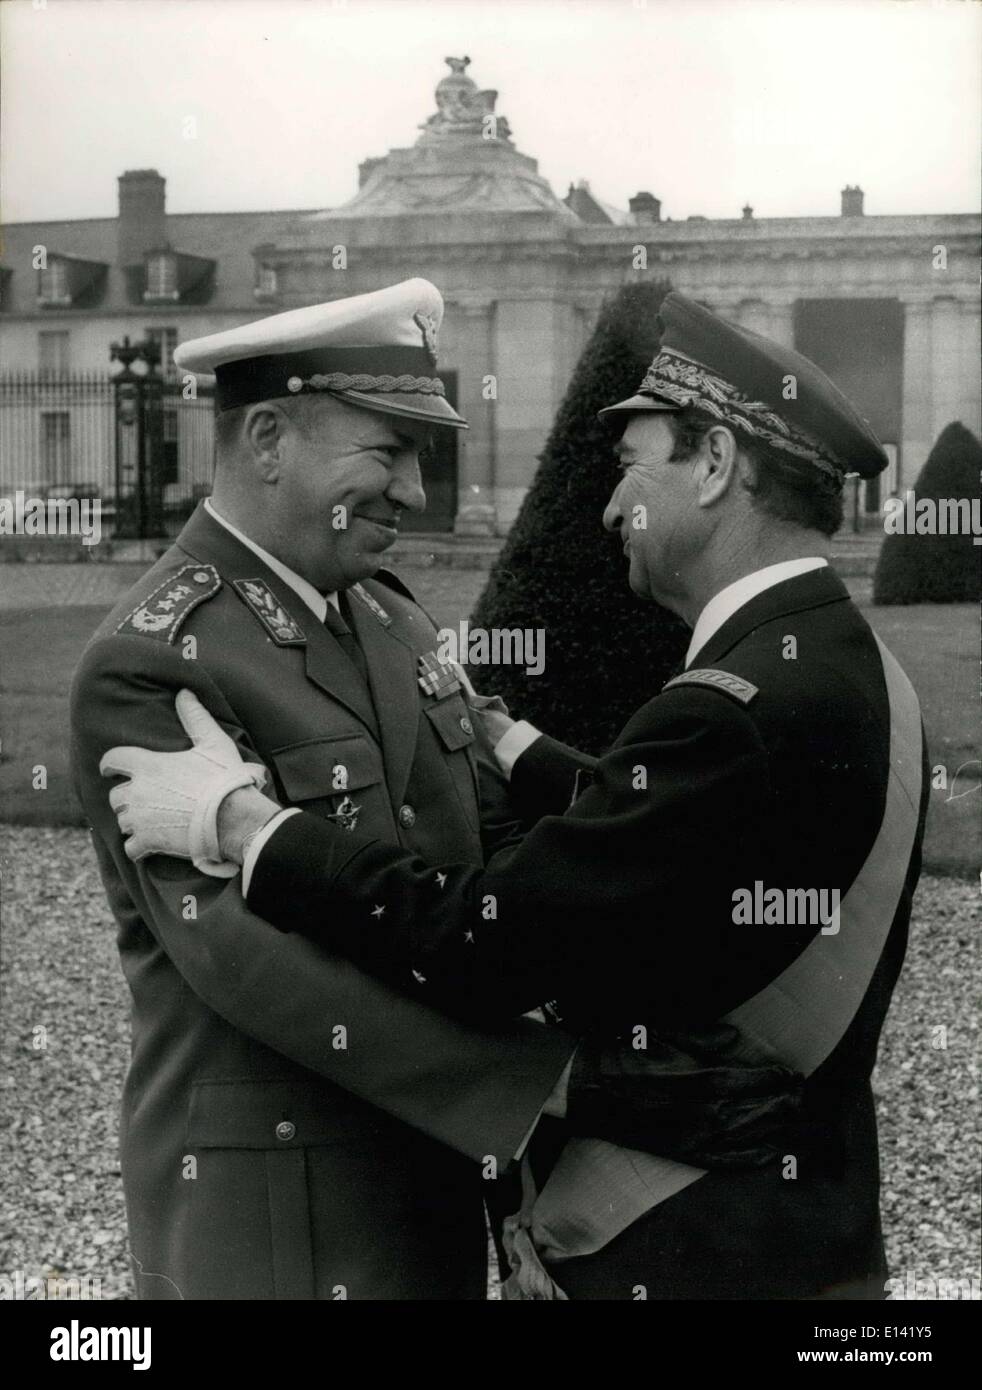 Mar. 31, 2012 - Bubanj (Yugoslavia) was elevated to the rank of an officer of the Legion of Honor during a ceremony at the National Military School in Paris. Stock Photo